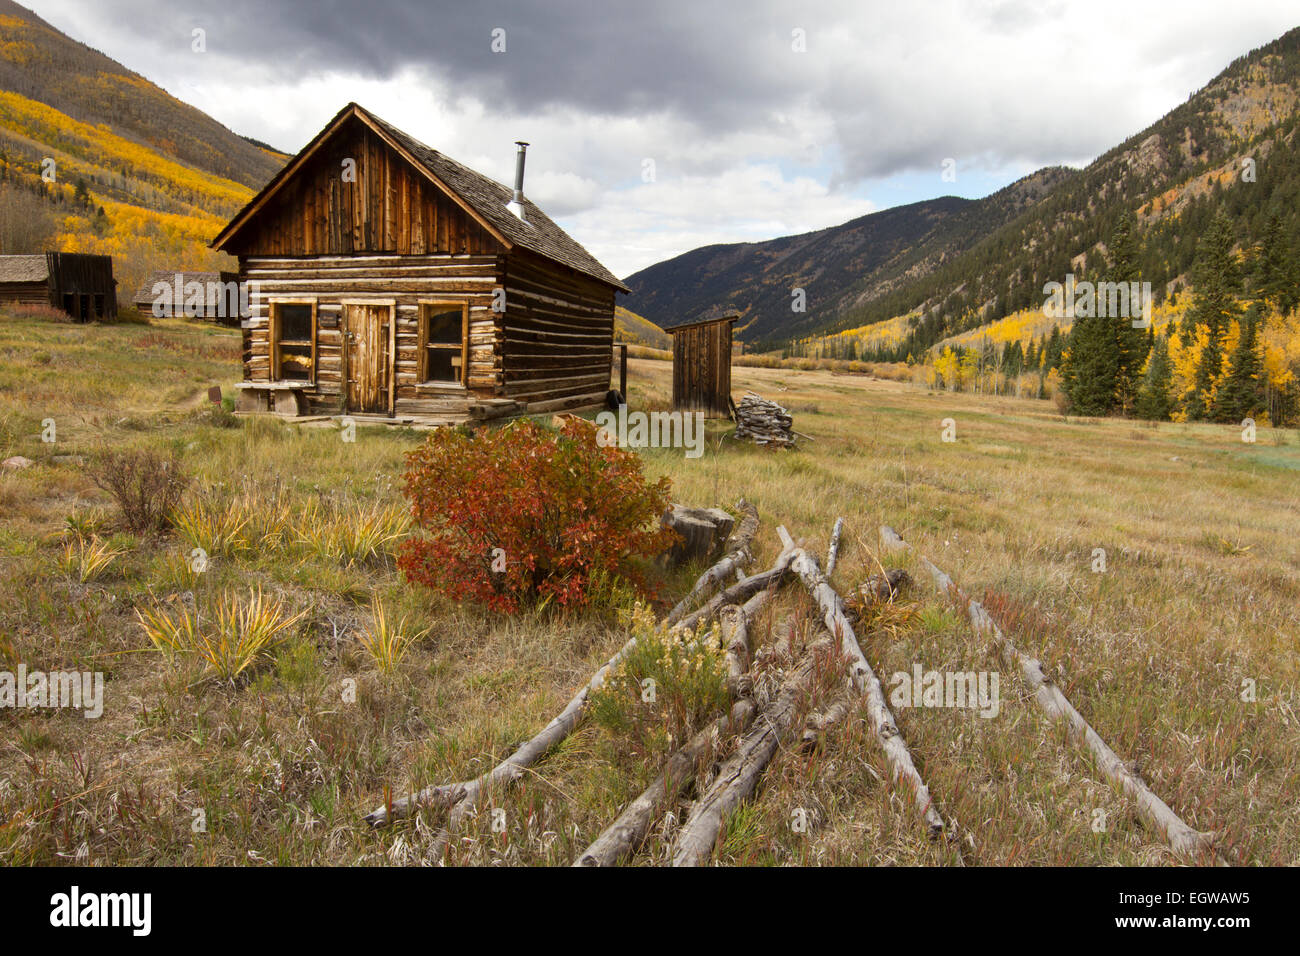 An autumn scene at Ashcroft Ghost Town in Colorado, USA Stock Photo